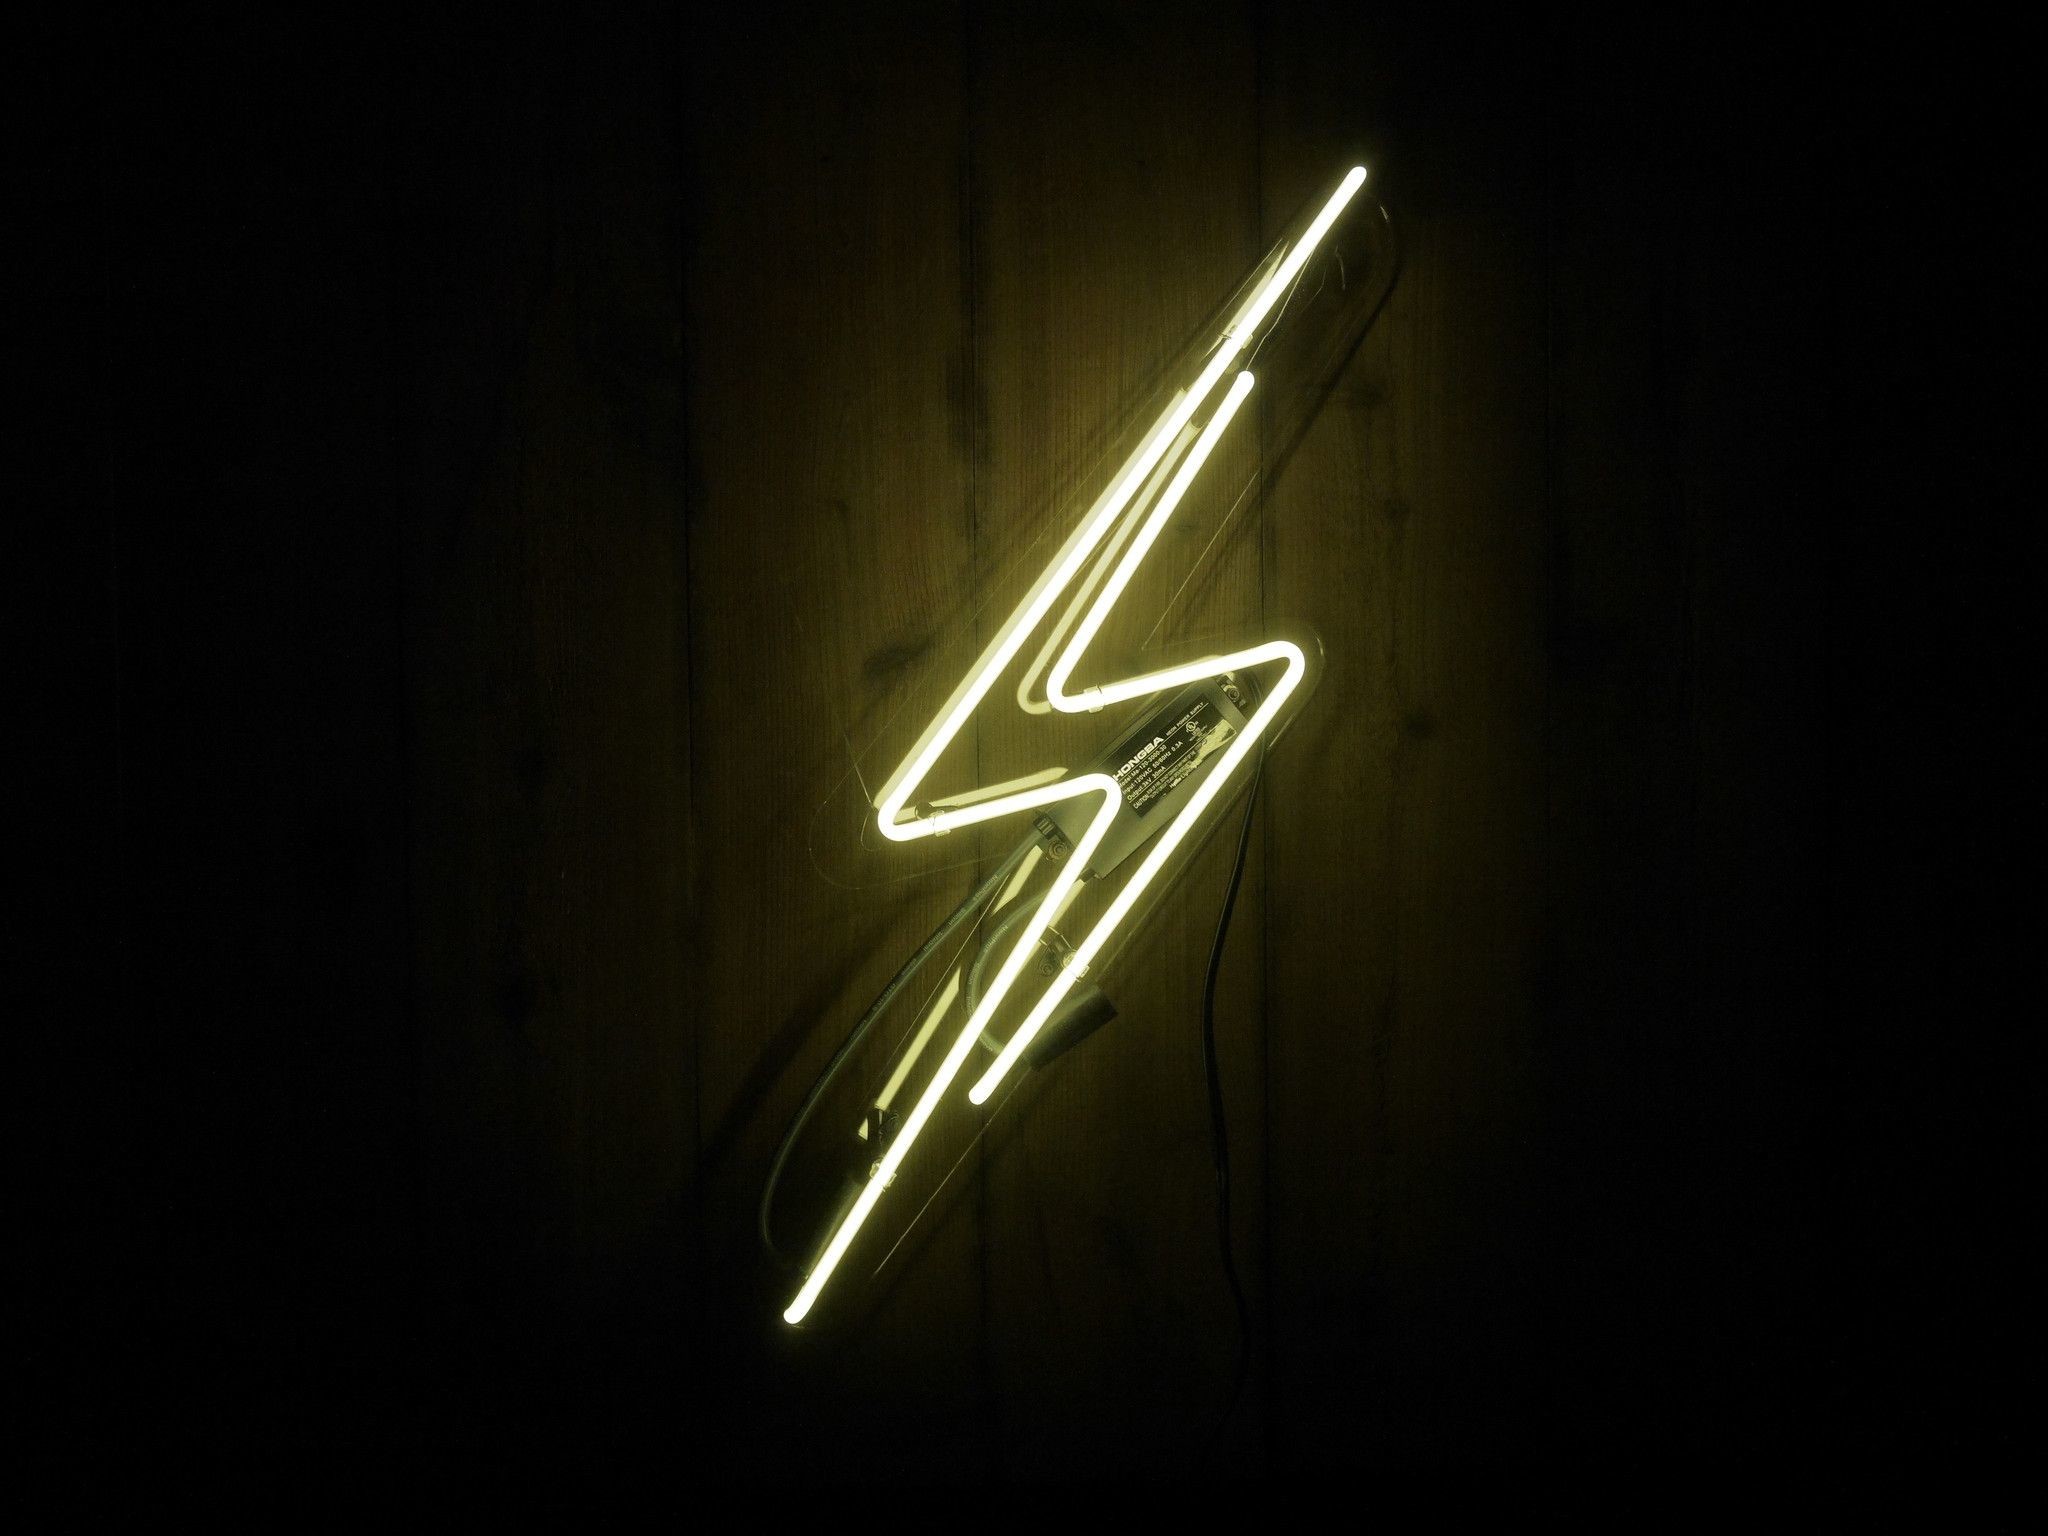 Charge Up Your Walls With Our Lightning Bolt Sign Our Lightning Bolt